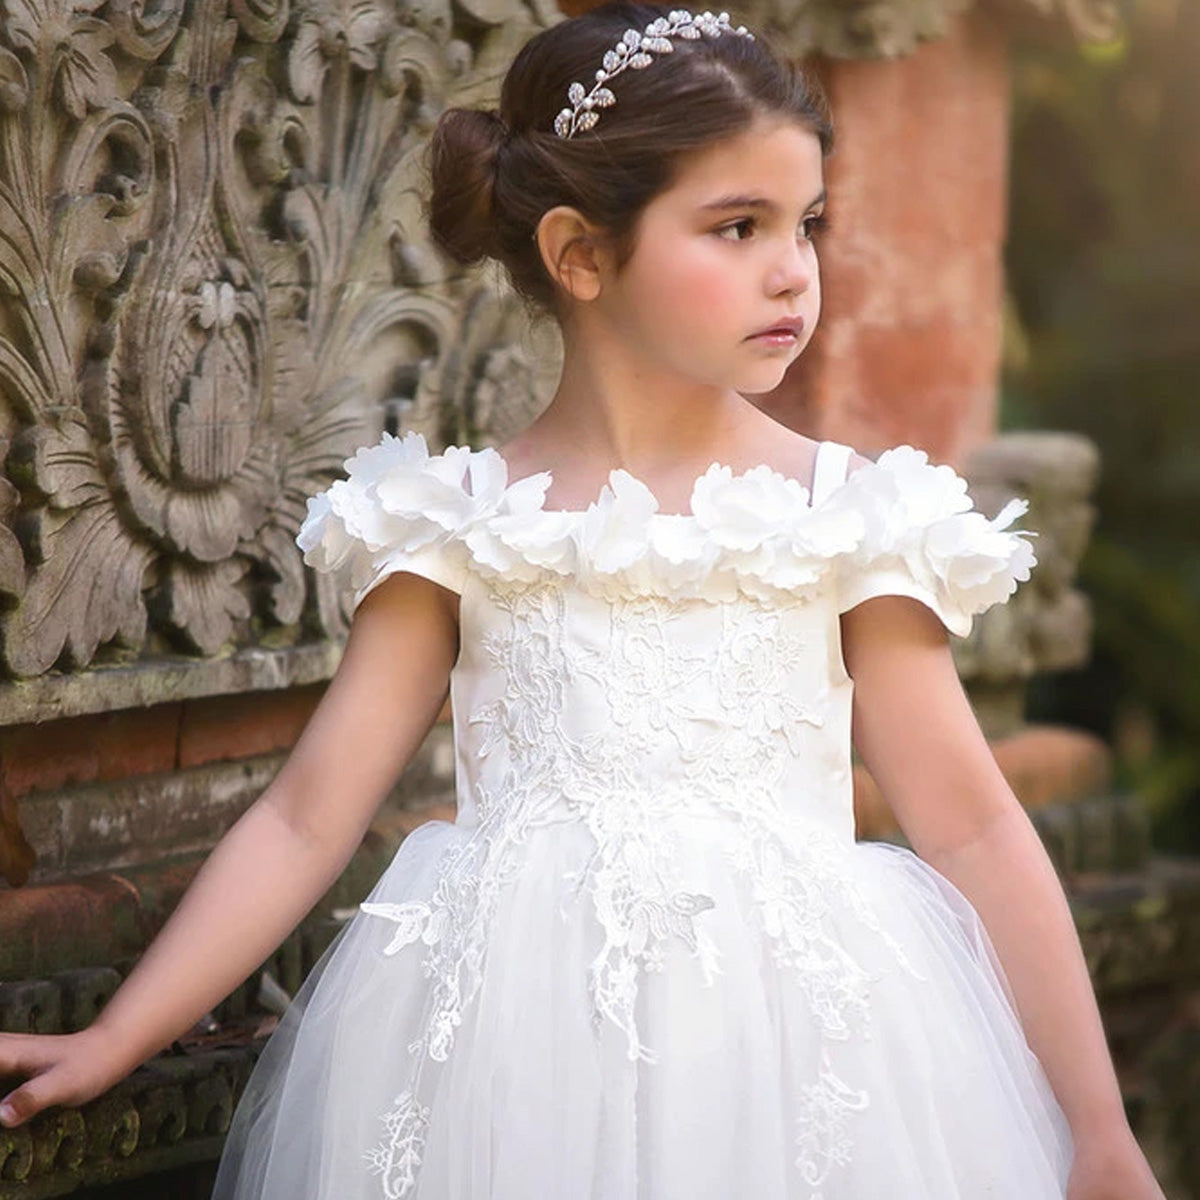 Belle White Dress Costumes for Toddler, Belle Gown – TRISH SCULLY